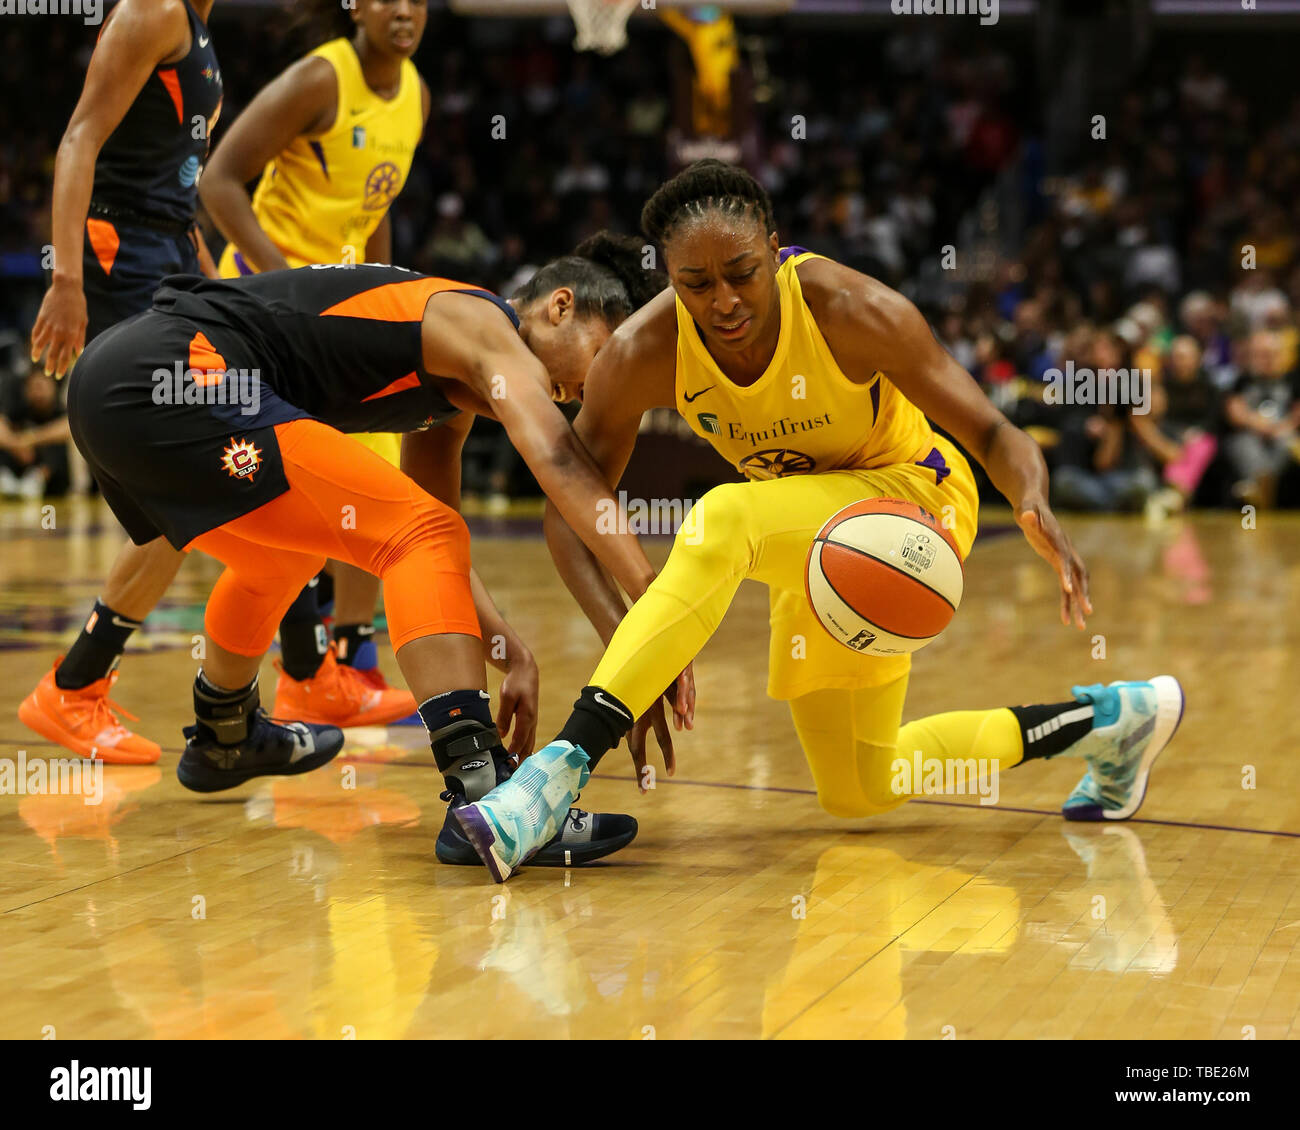 Los Angeles Sparks forward Nneka Ogwumike #30 dribbling from her knees during the Connecticut Sun vs Los Angeles Sparks game at Staples Center in Los Angeles, Ca on May 31, 2019. (Photo by Jevone Moore) Stock Photo